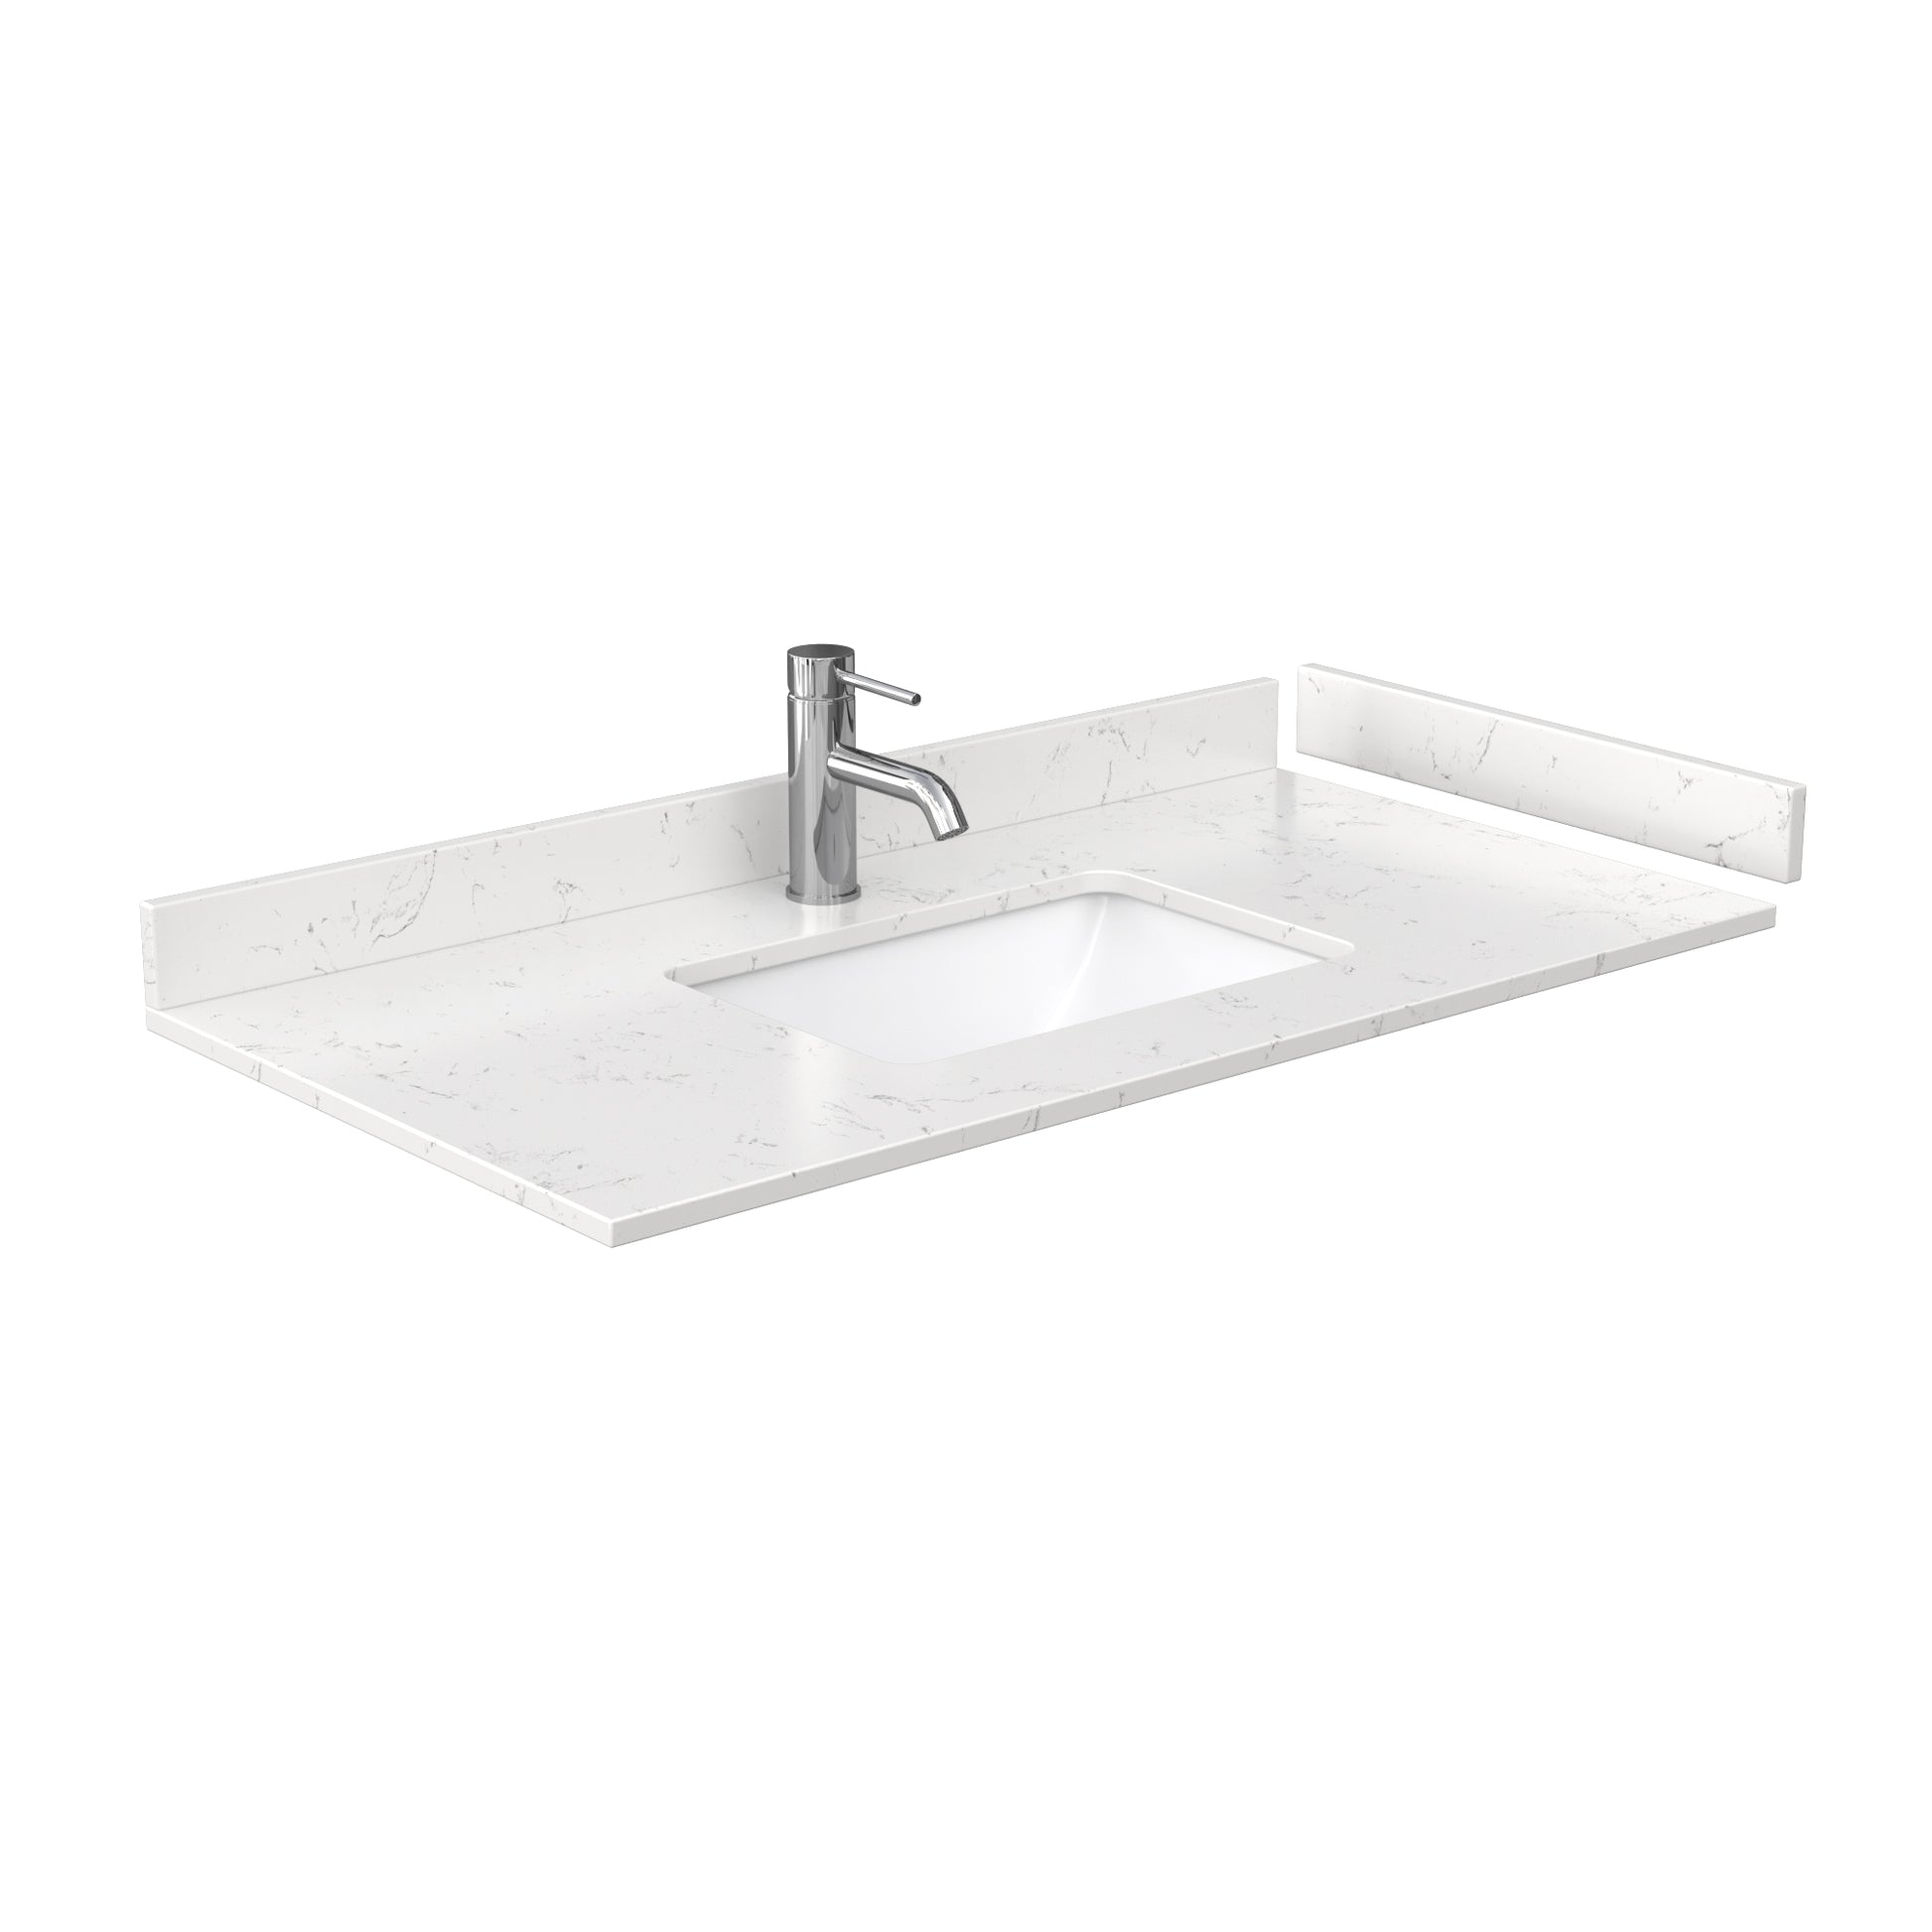 
  
  Amici Single Bathroom Vanity in White, with Cultured Marble, Undermount Square Sink, Optional Trim
  
